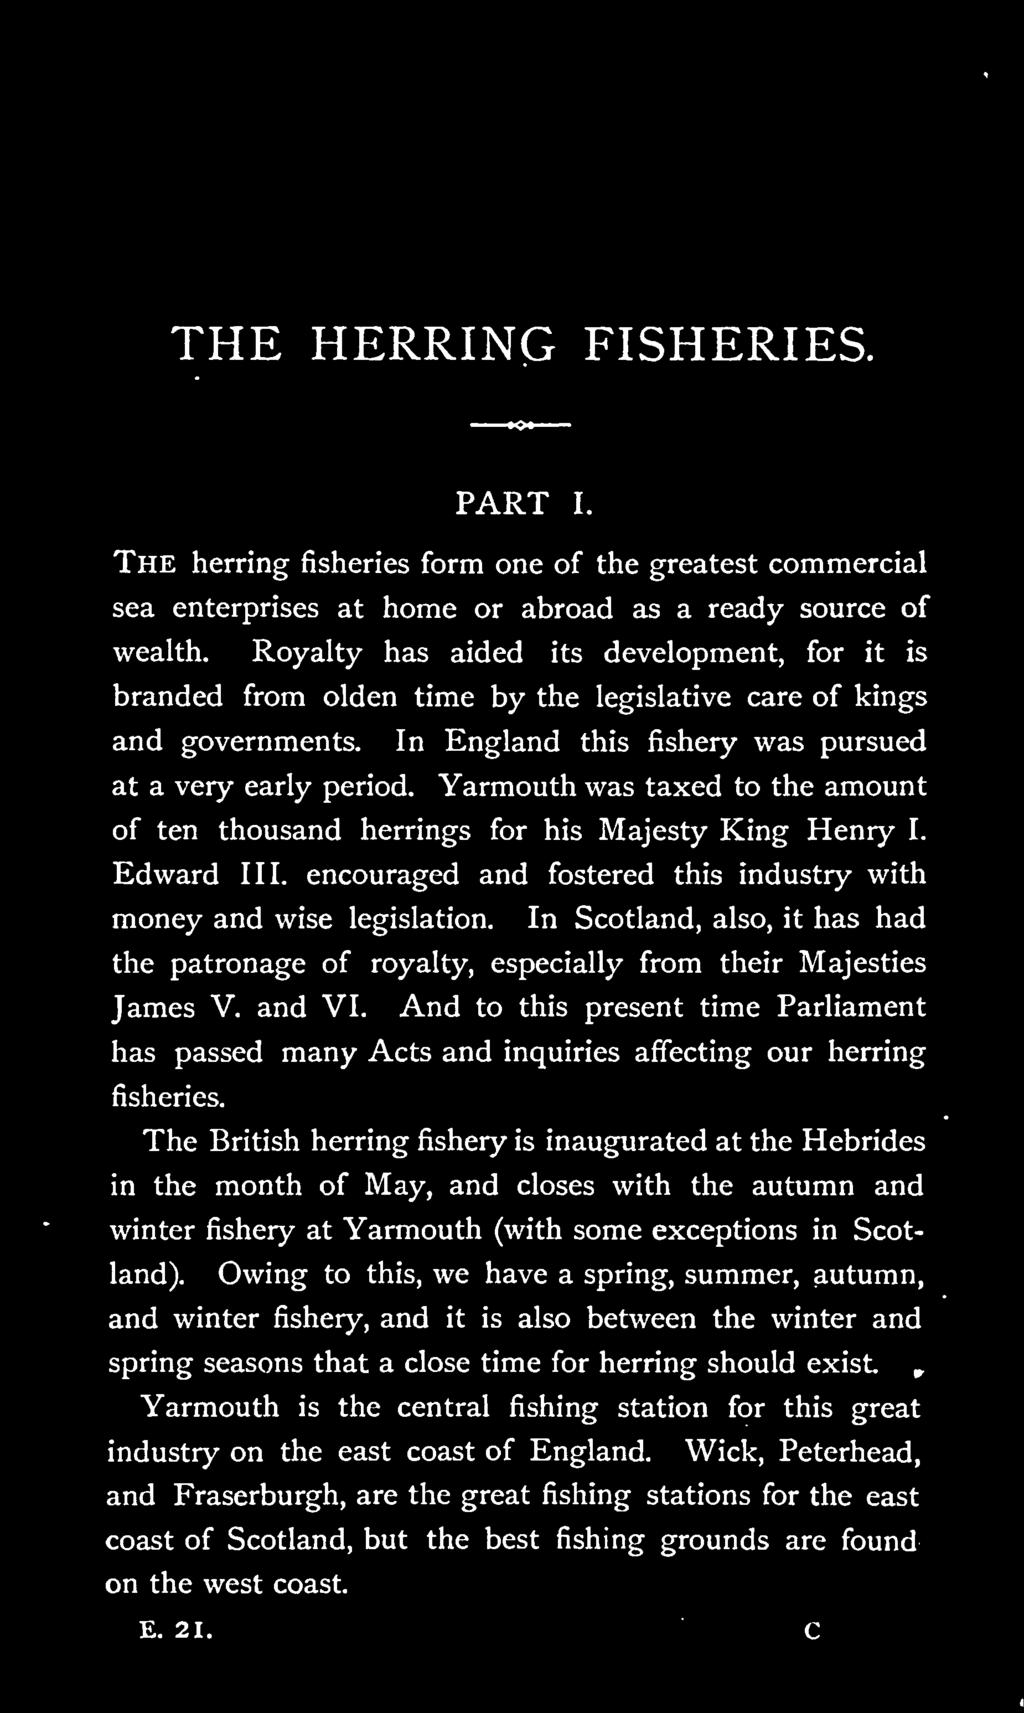 And to this present time Parliament has passed many Acts and inquiries affecting our herring fisheries.